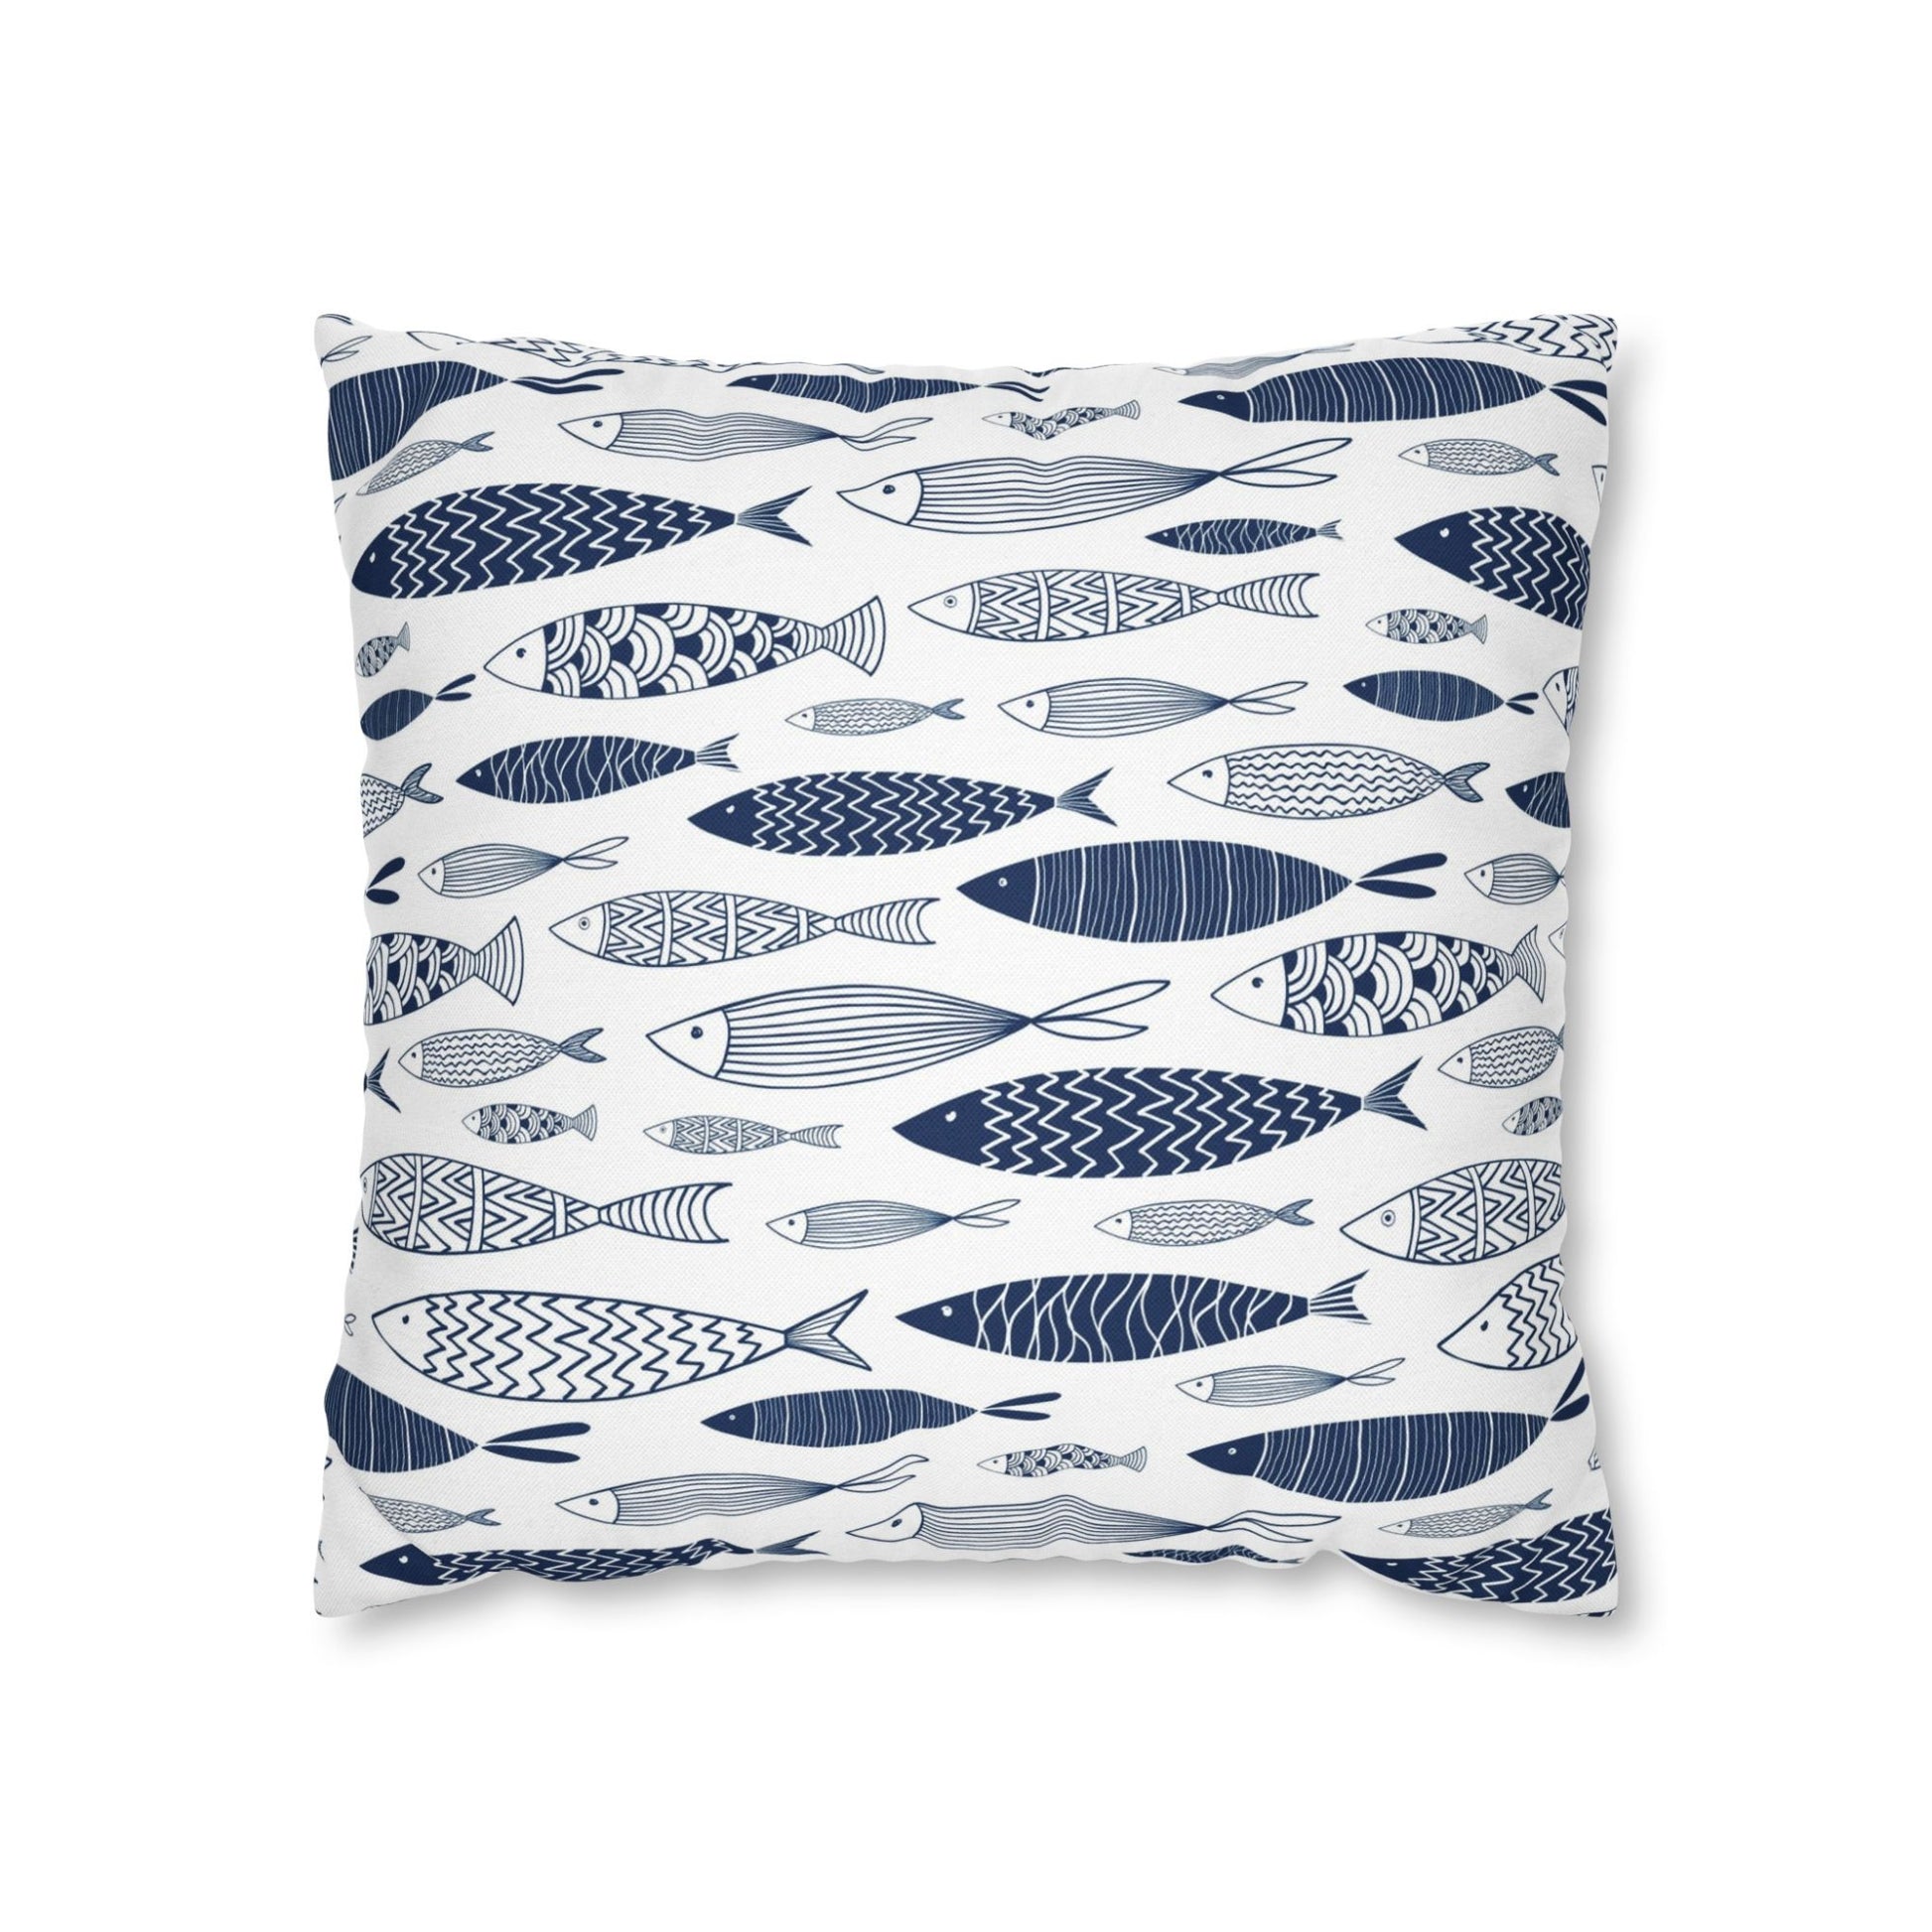 Blue fish throw pillow from Blue Water Songs